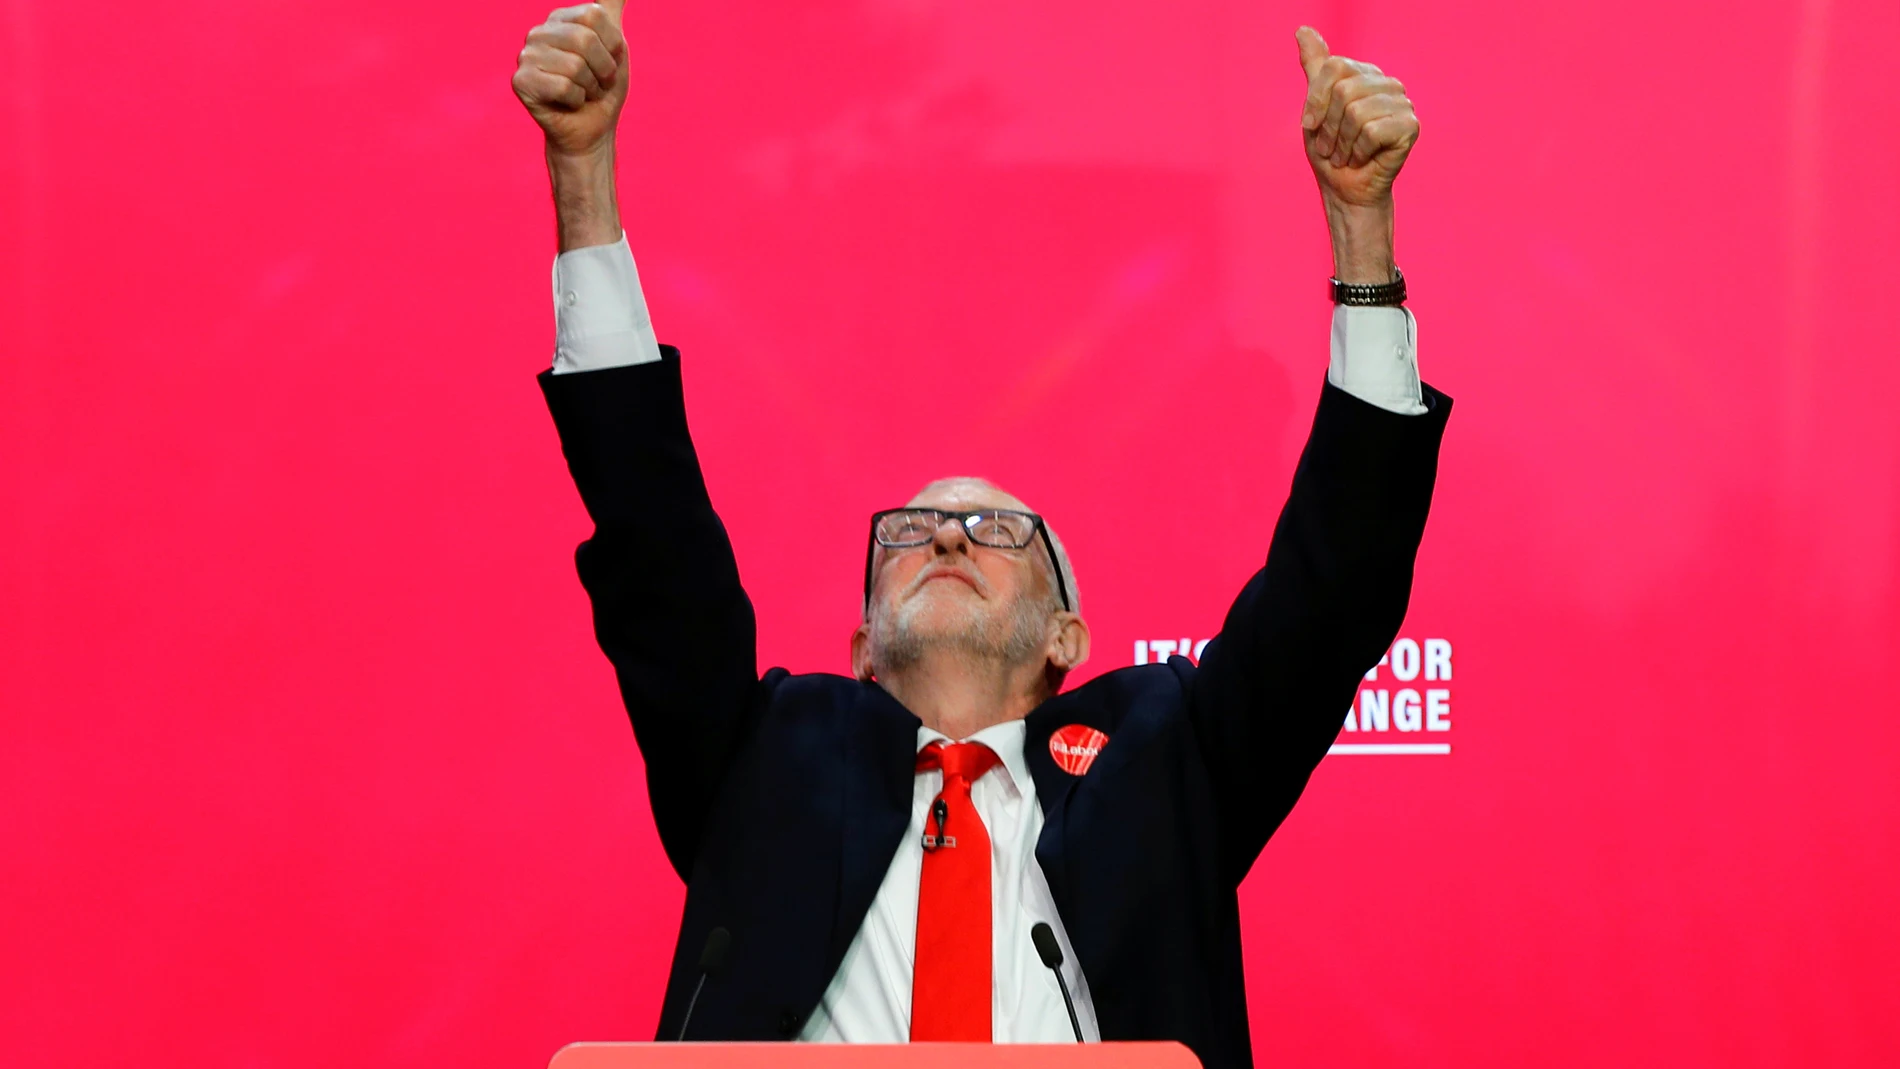 Labour Party launches its party manifesto in Birmingham